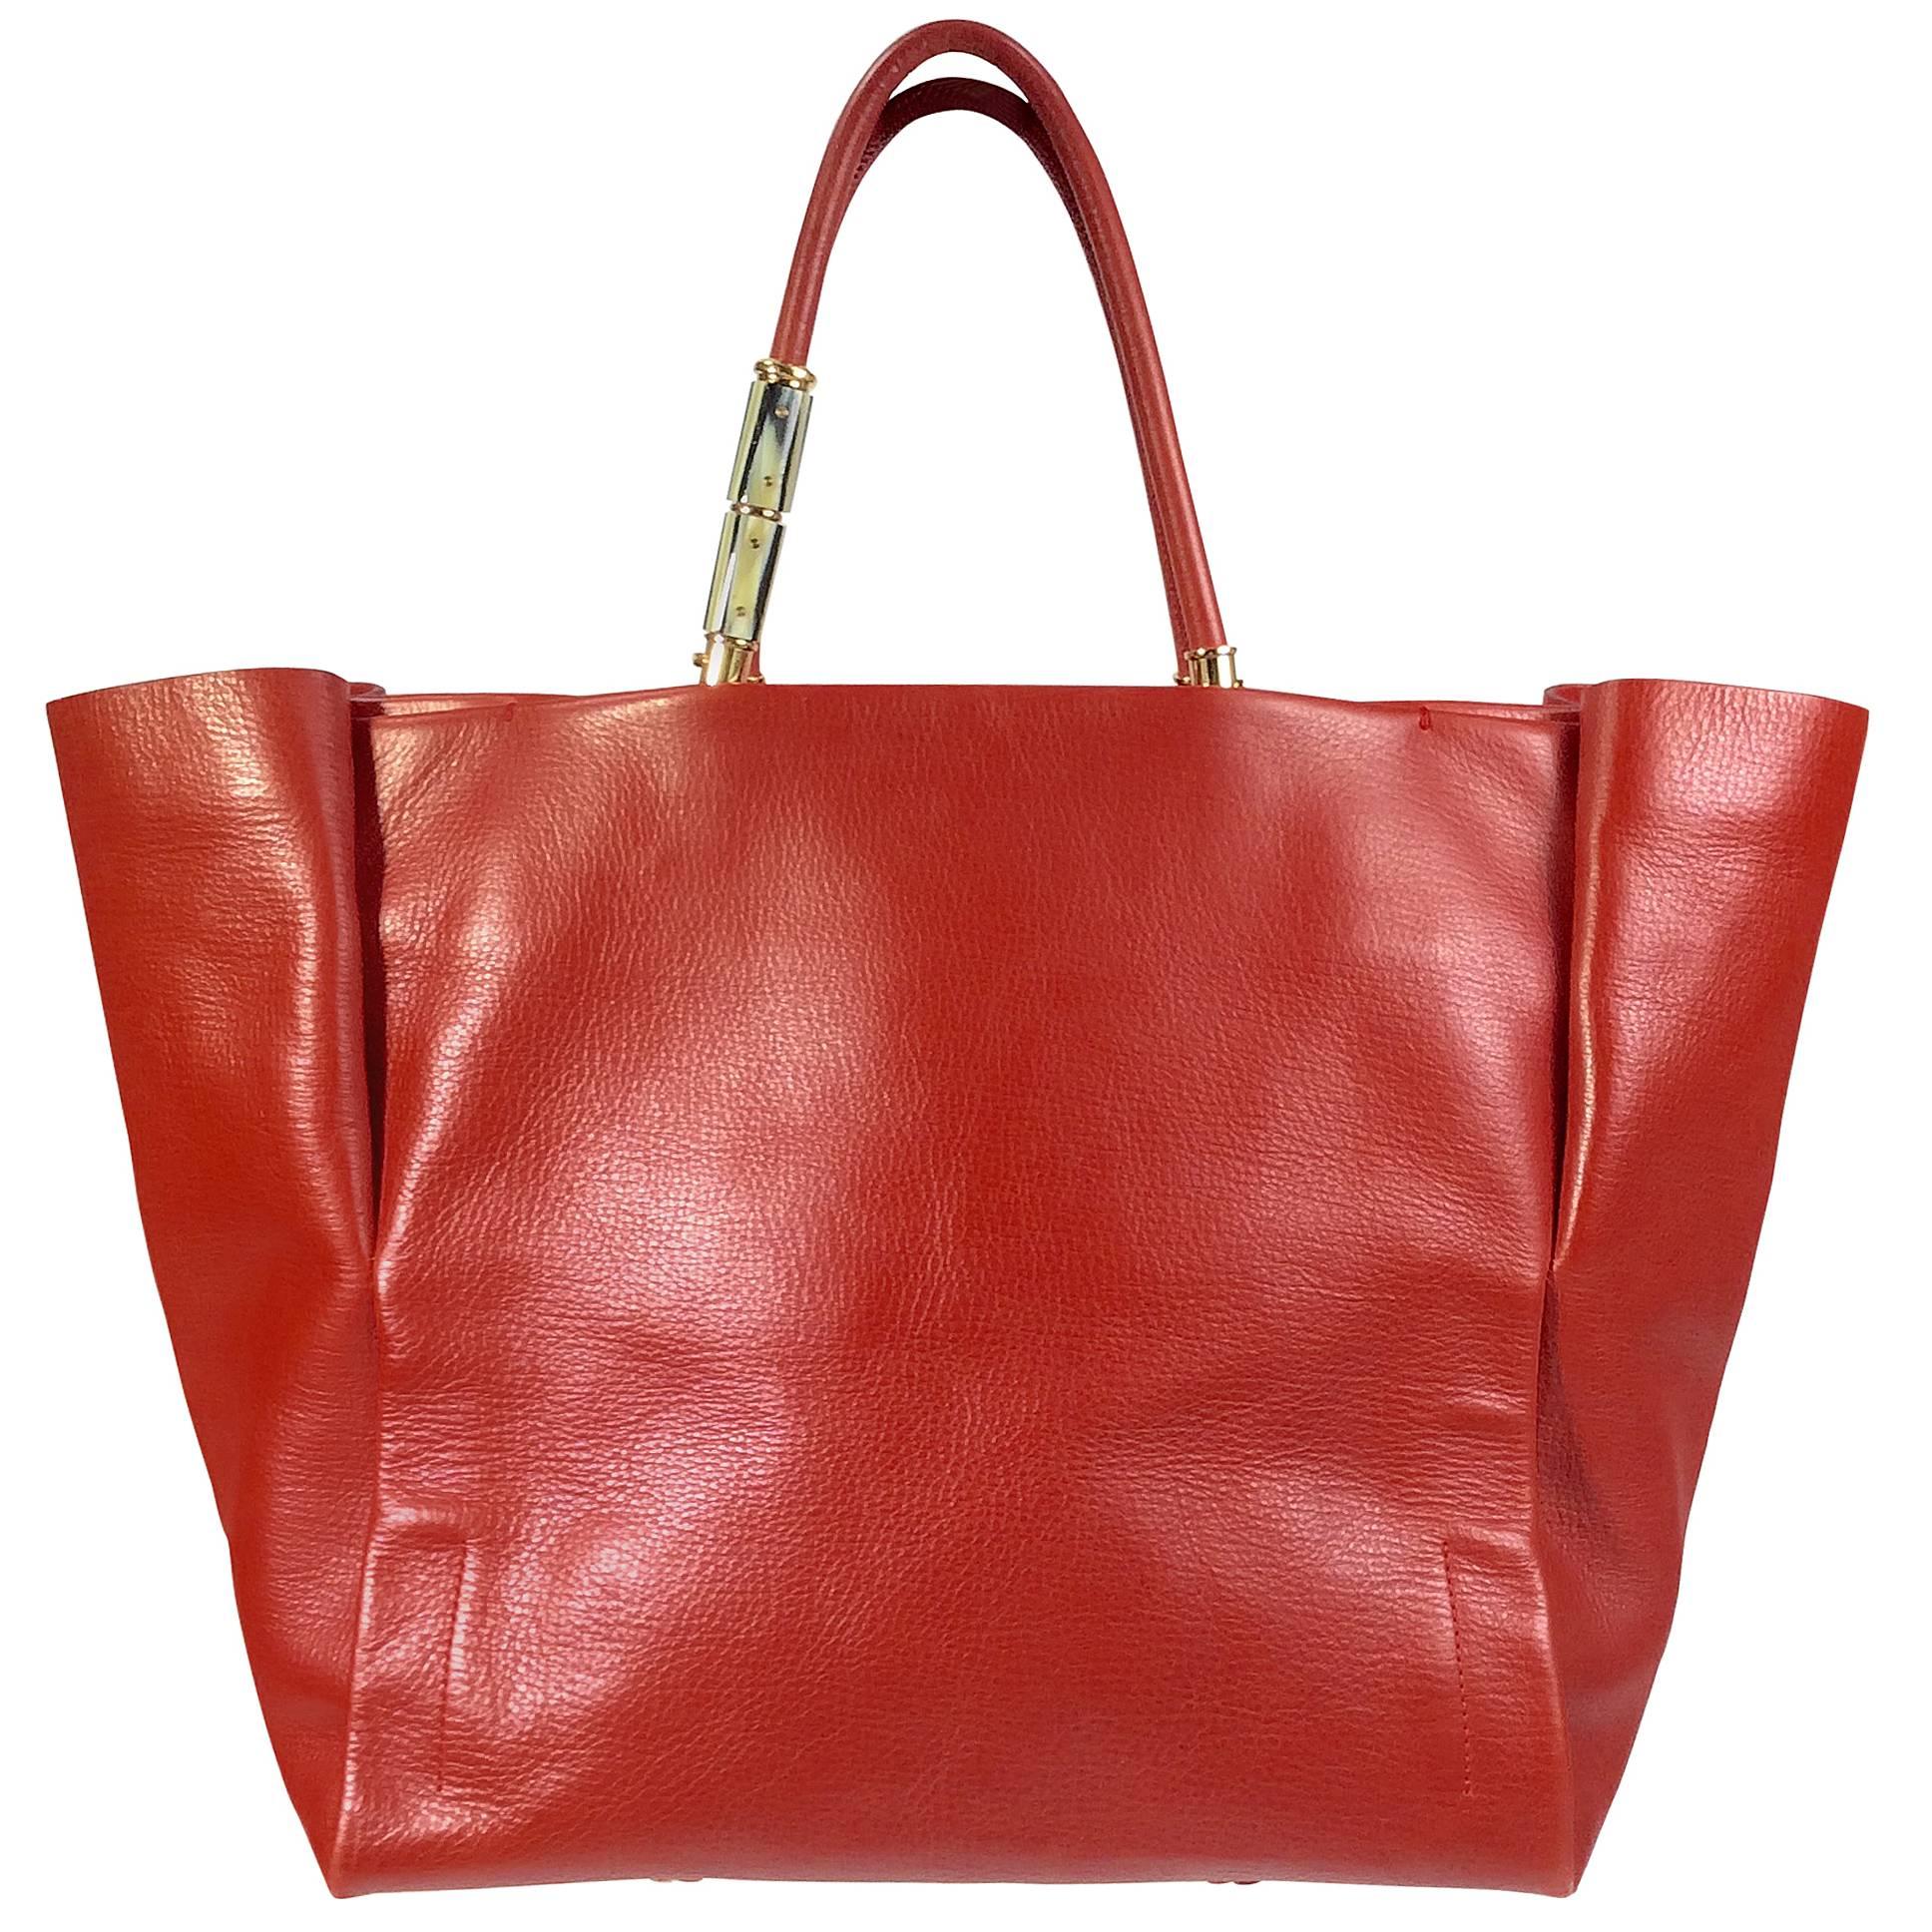 Lanvin Red Leather Tote with Gold Hardware For Sale